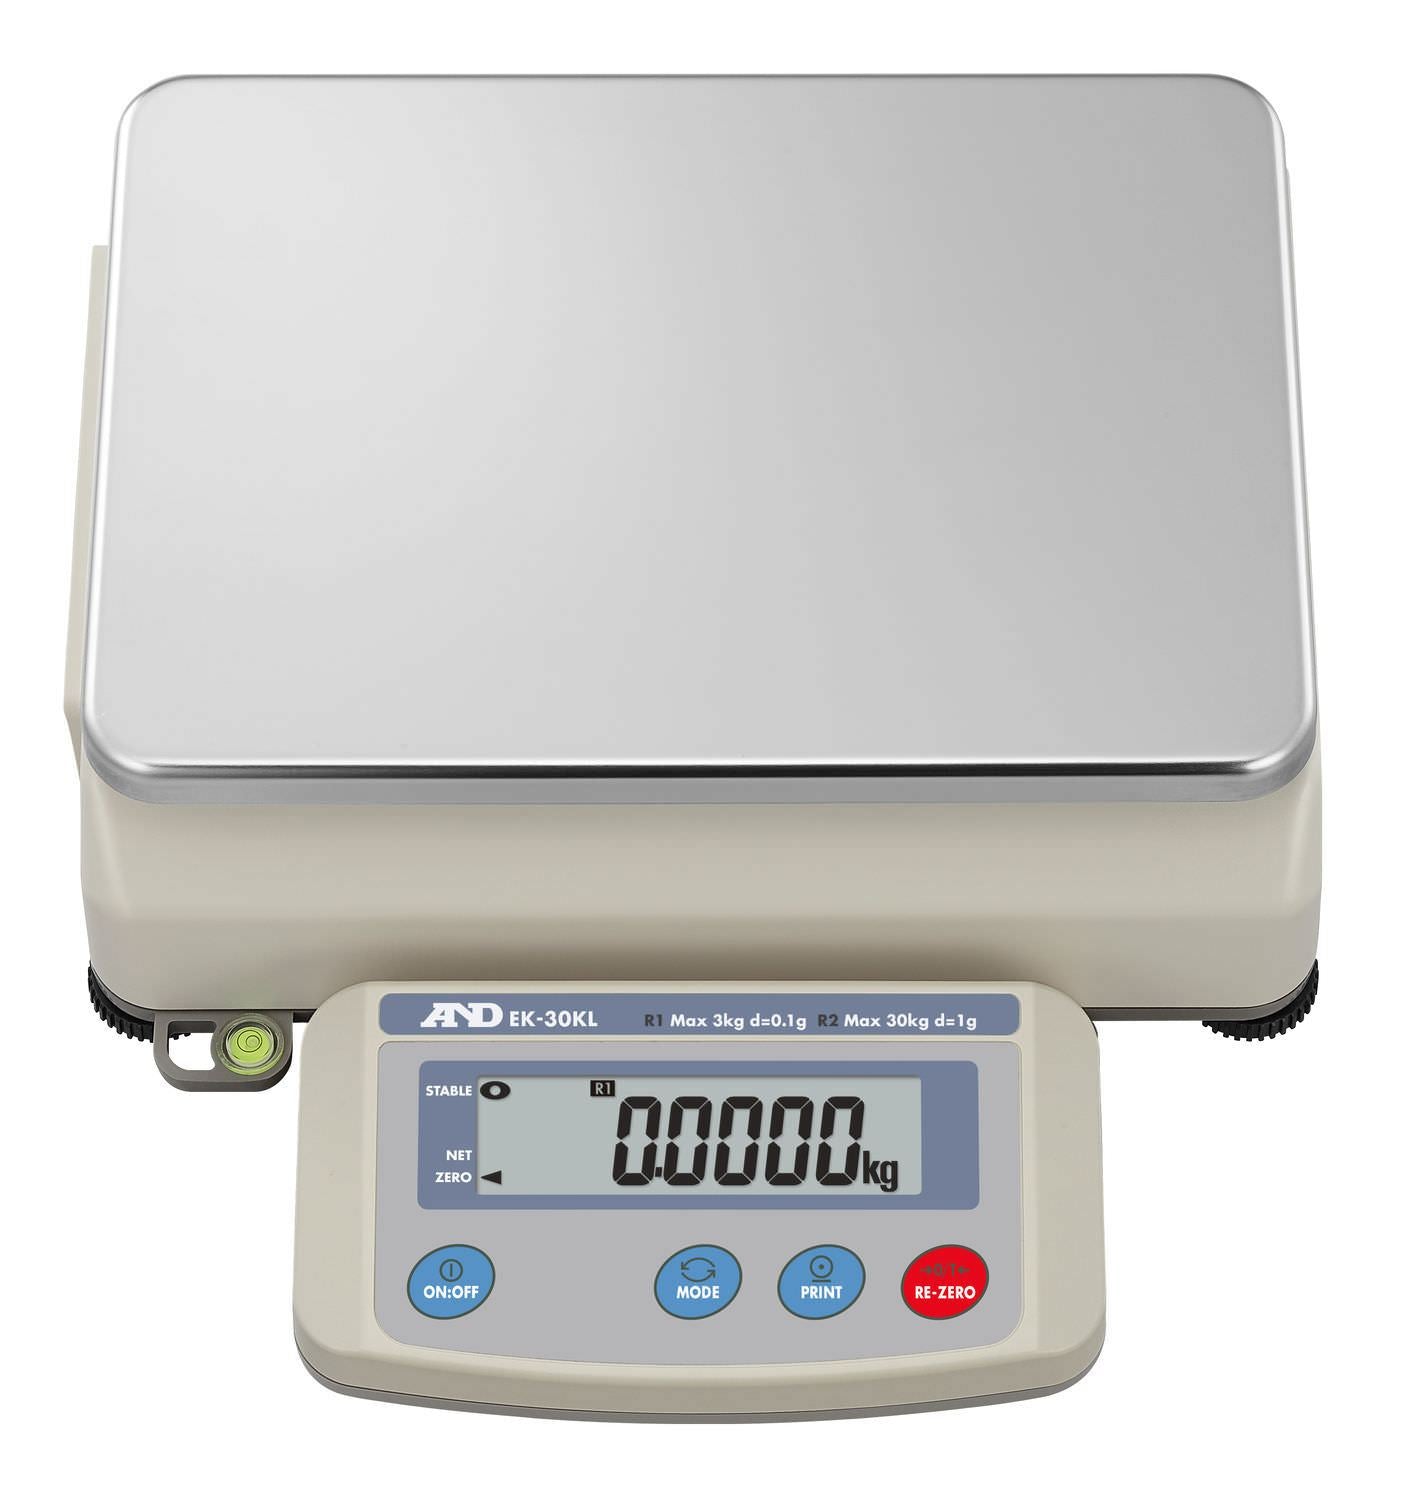 AND Weighing EK-30KL Precision Bench Scale